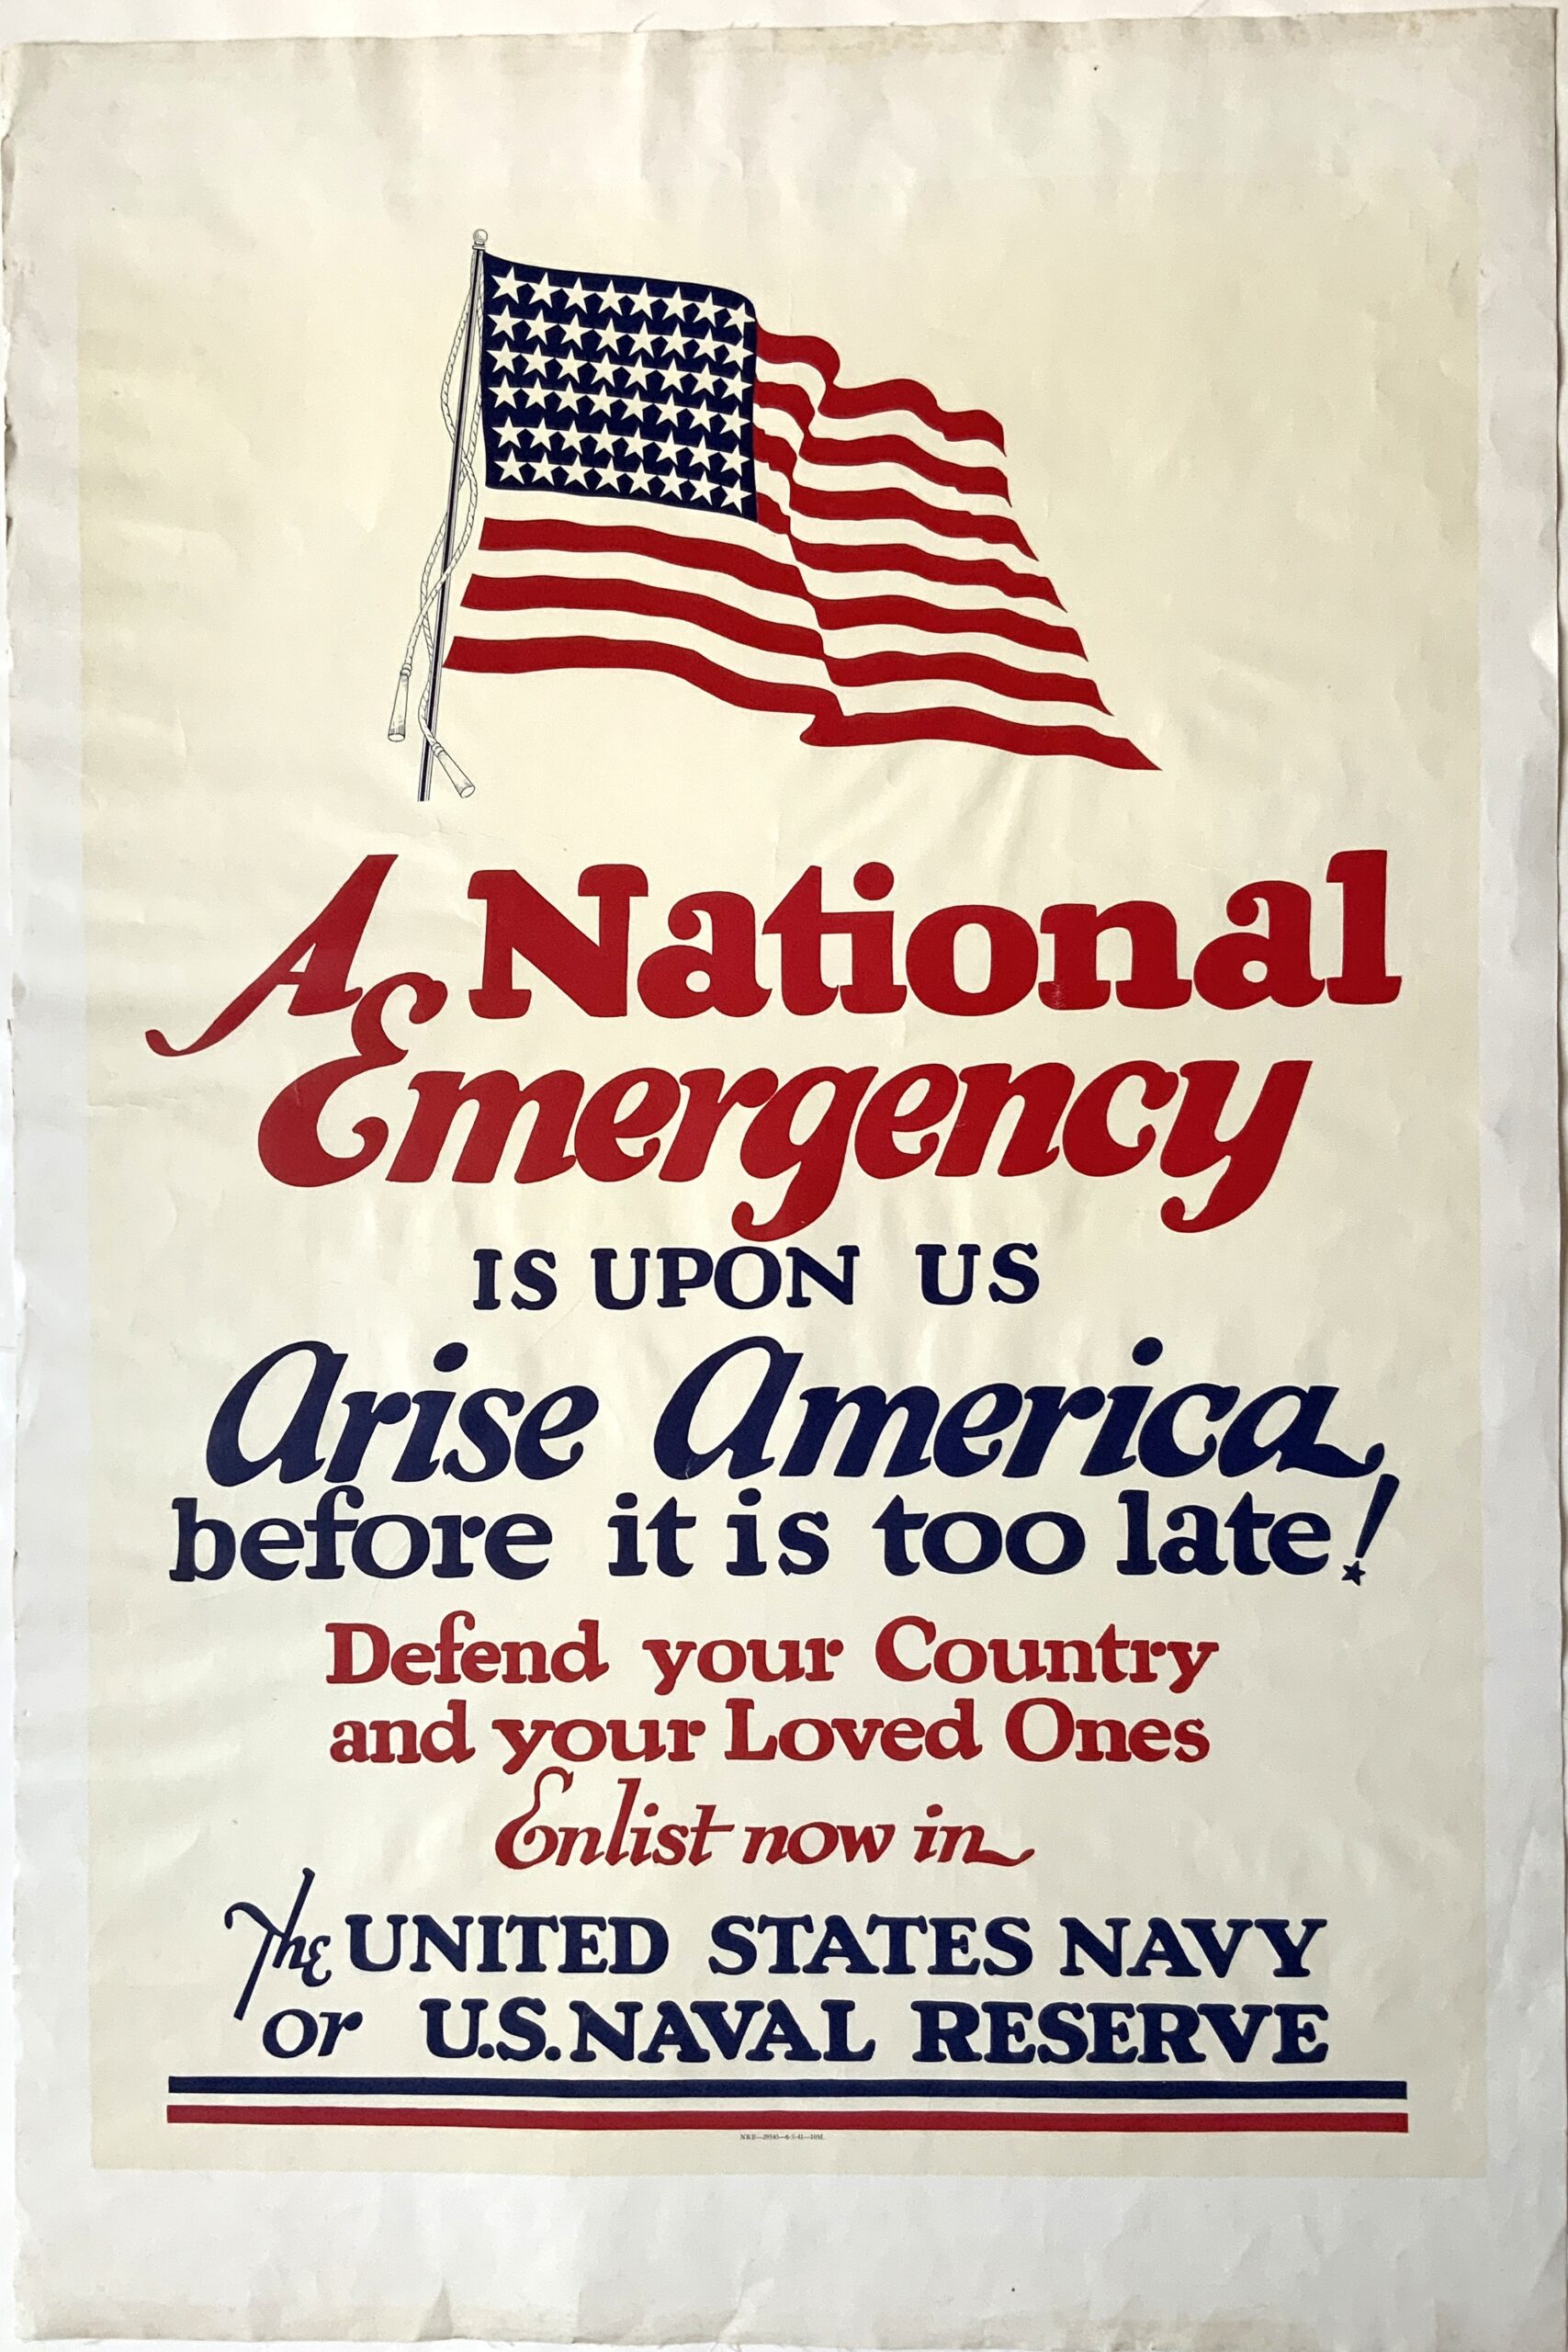 B1671	A NATIONAL EMERGENCY IS UPON US - ARISE AMERICA BEFORE IT IS TOO LATE